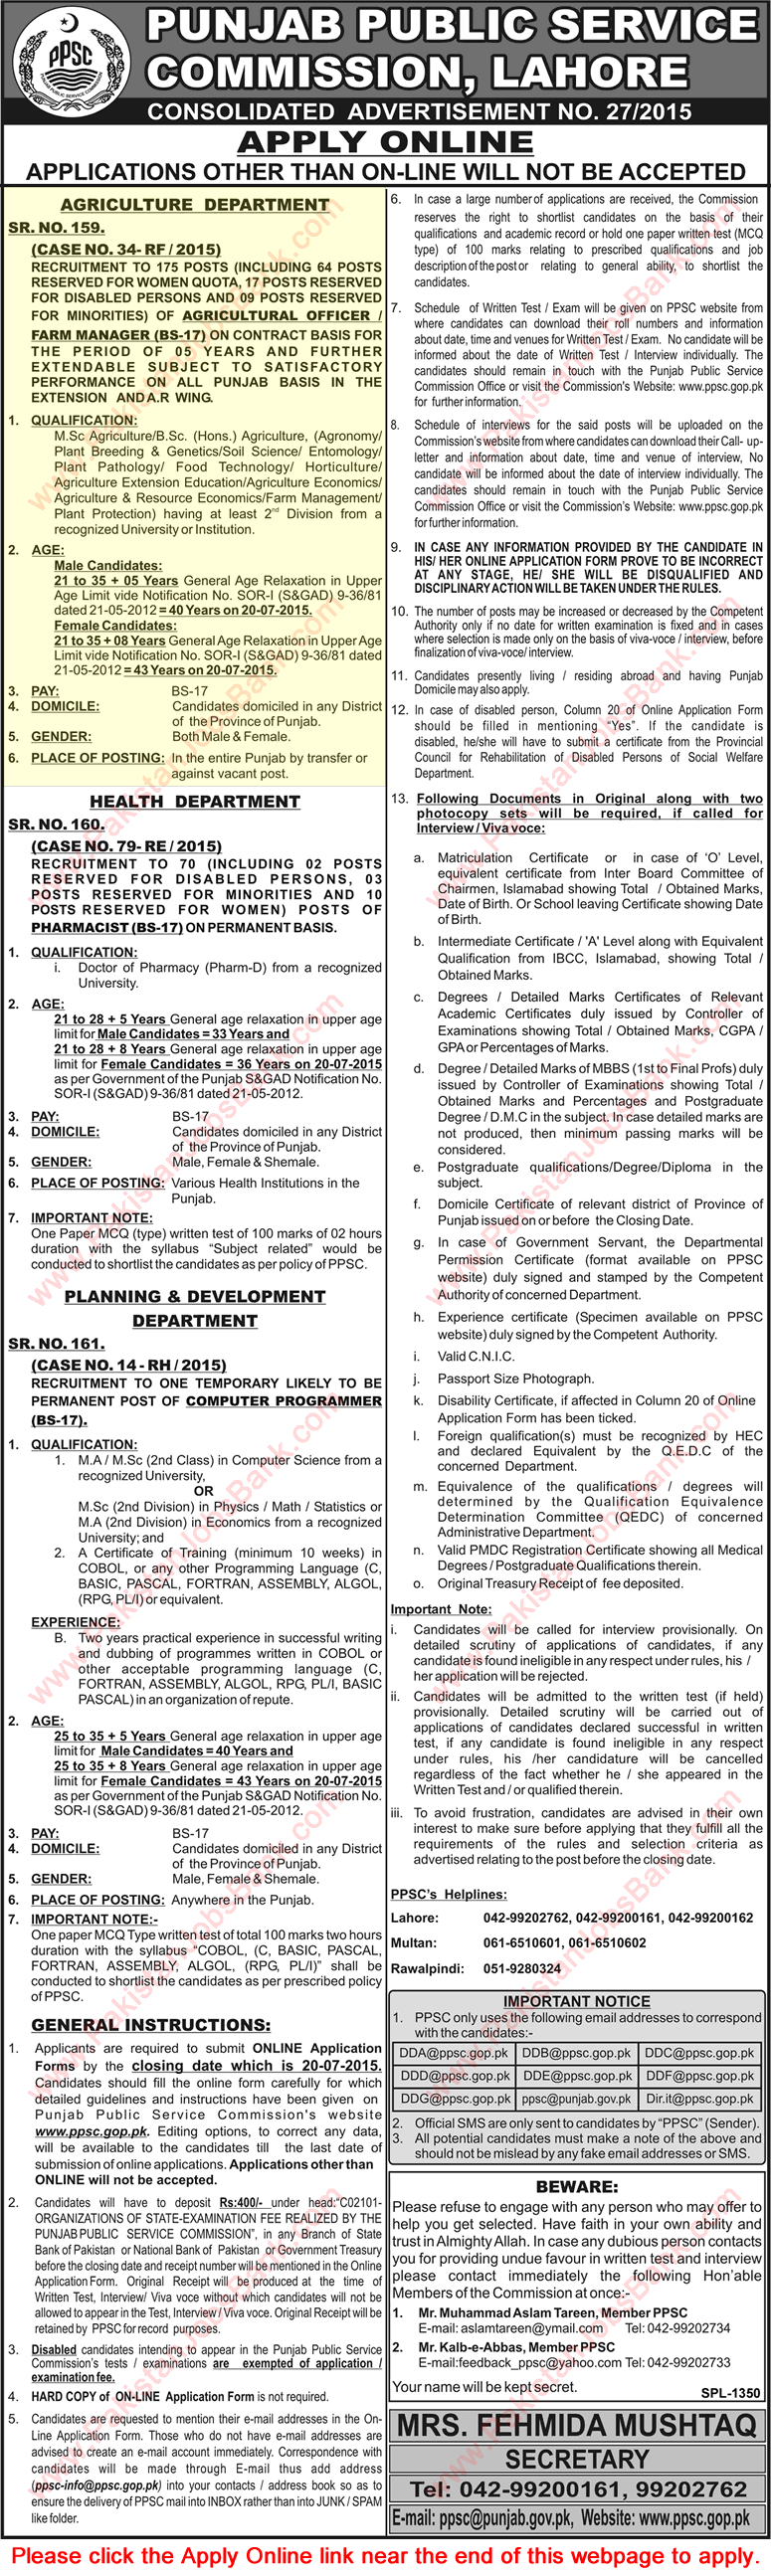 PPSC Agriculture Department Punjab Jobs July 2015 Agricultural Officers / Farm Managers Latest